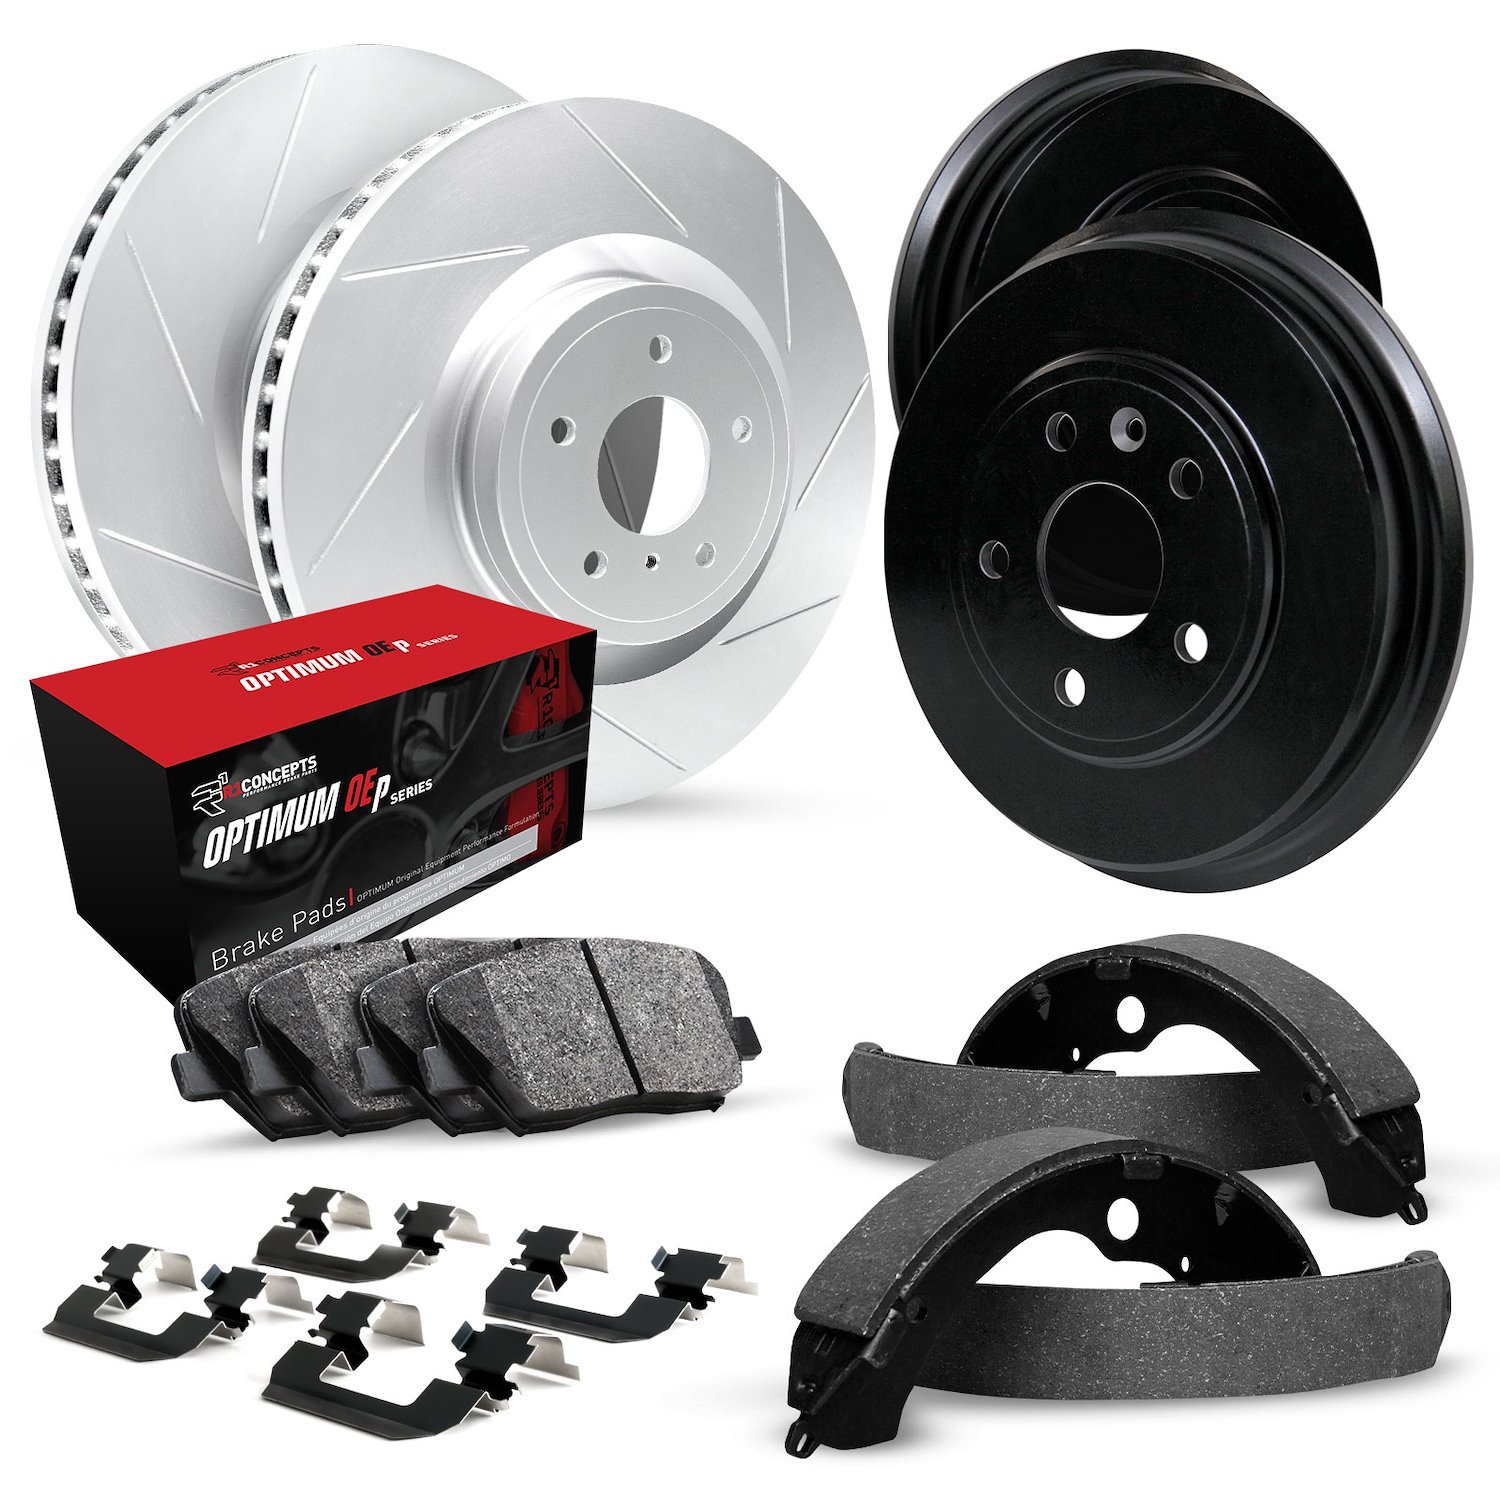 GEO-Carbon Slotted Brake Rotor & Drum Set w/Optimum OE Pads, Shoes, & Hardware, 1971-1975 GM, Position: Front & Rear